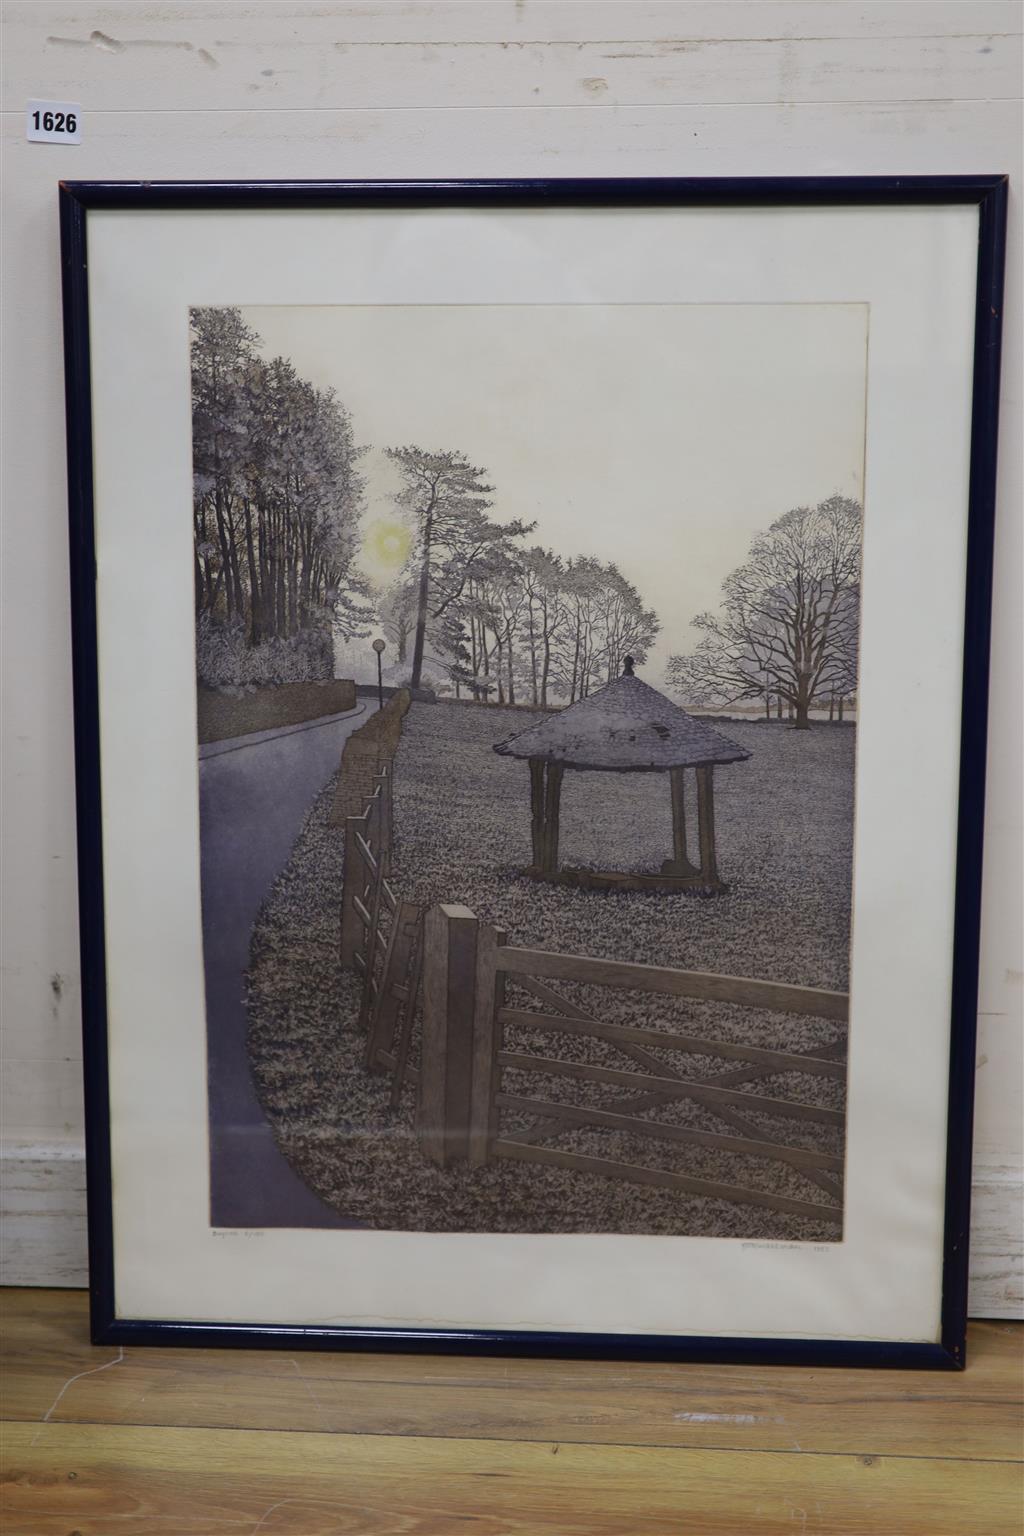 J.W. Winkelmann, limited edition print, Baywell, signed and dated 1982, 6/150, 54 x 38cm